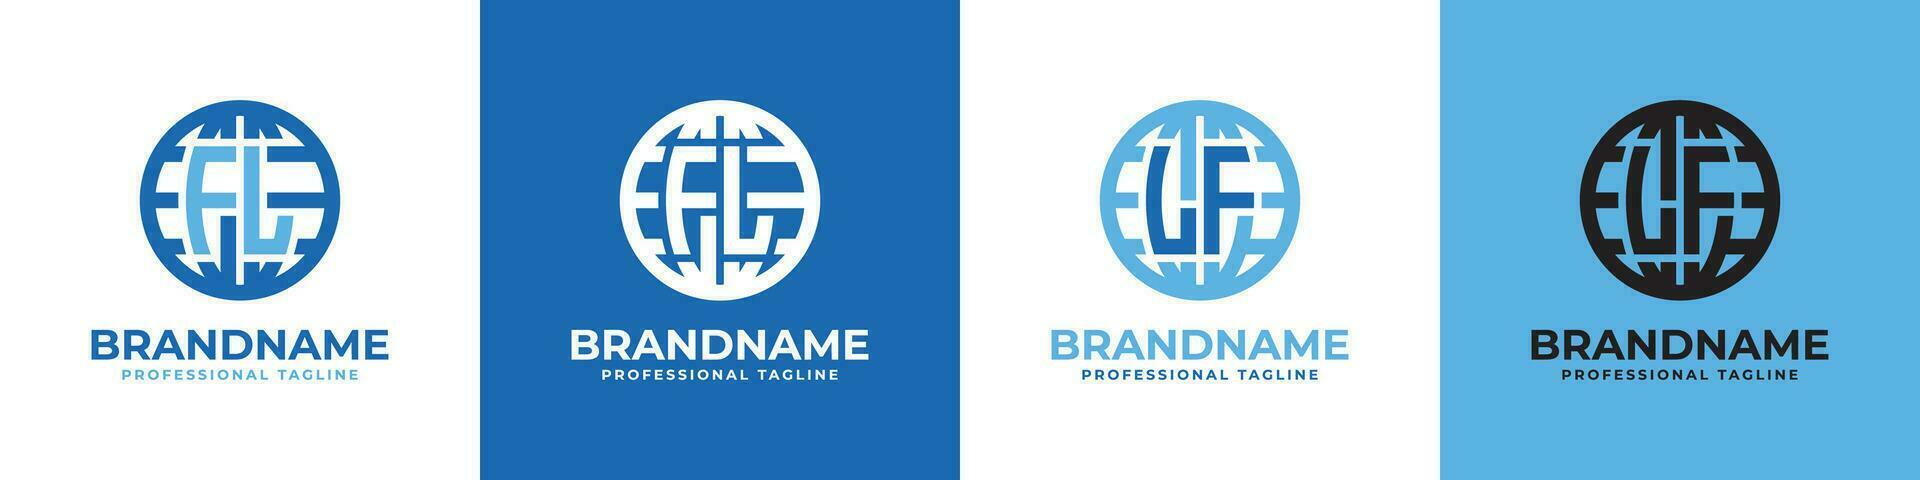 Letter FL and LF Globe Logo Set, suitable for any business with FL or LF initials. vector